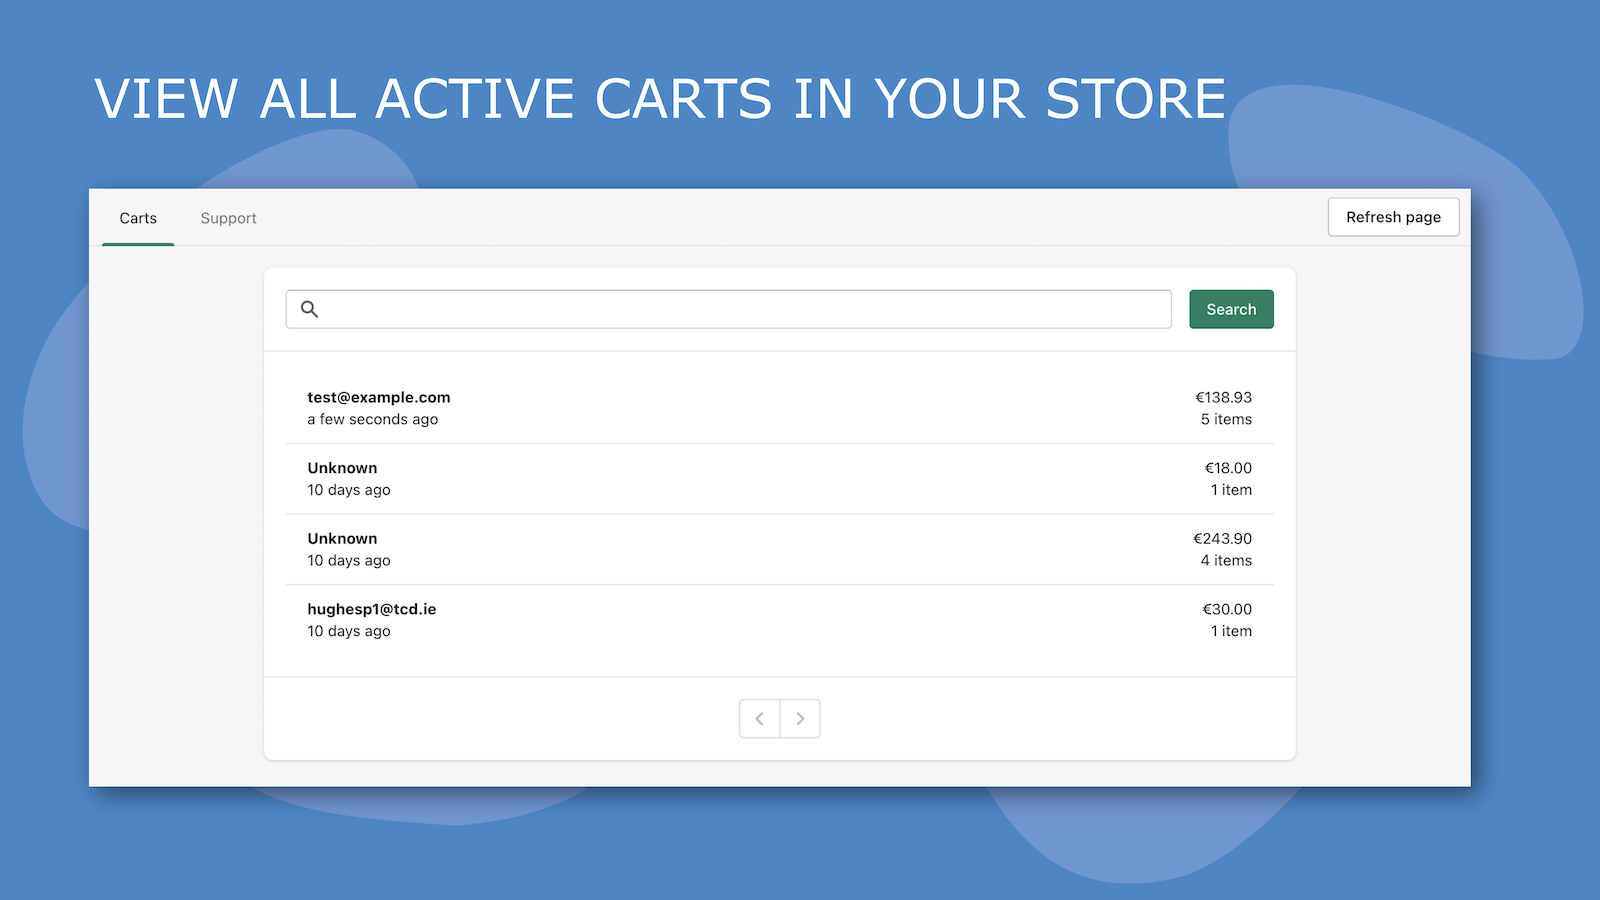 View and search all active carts in your store